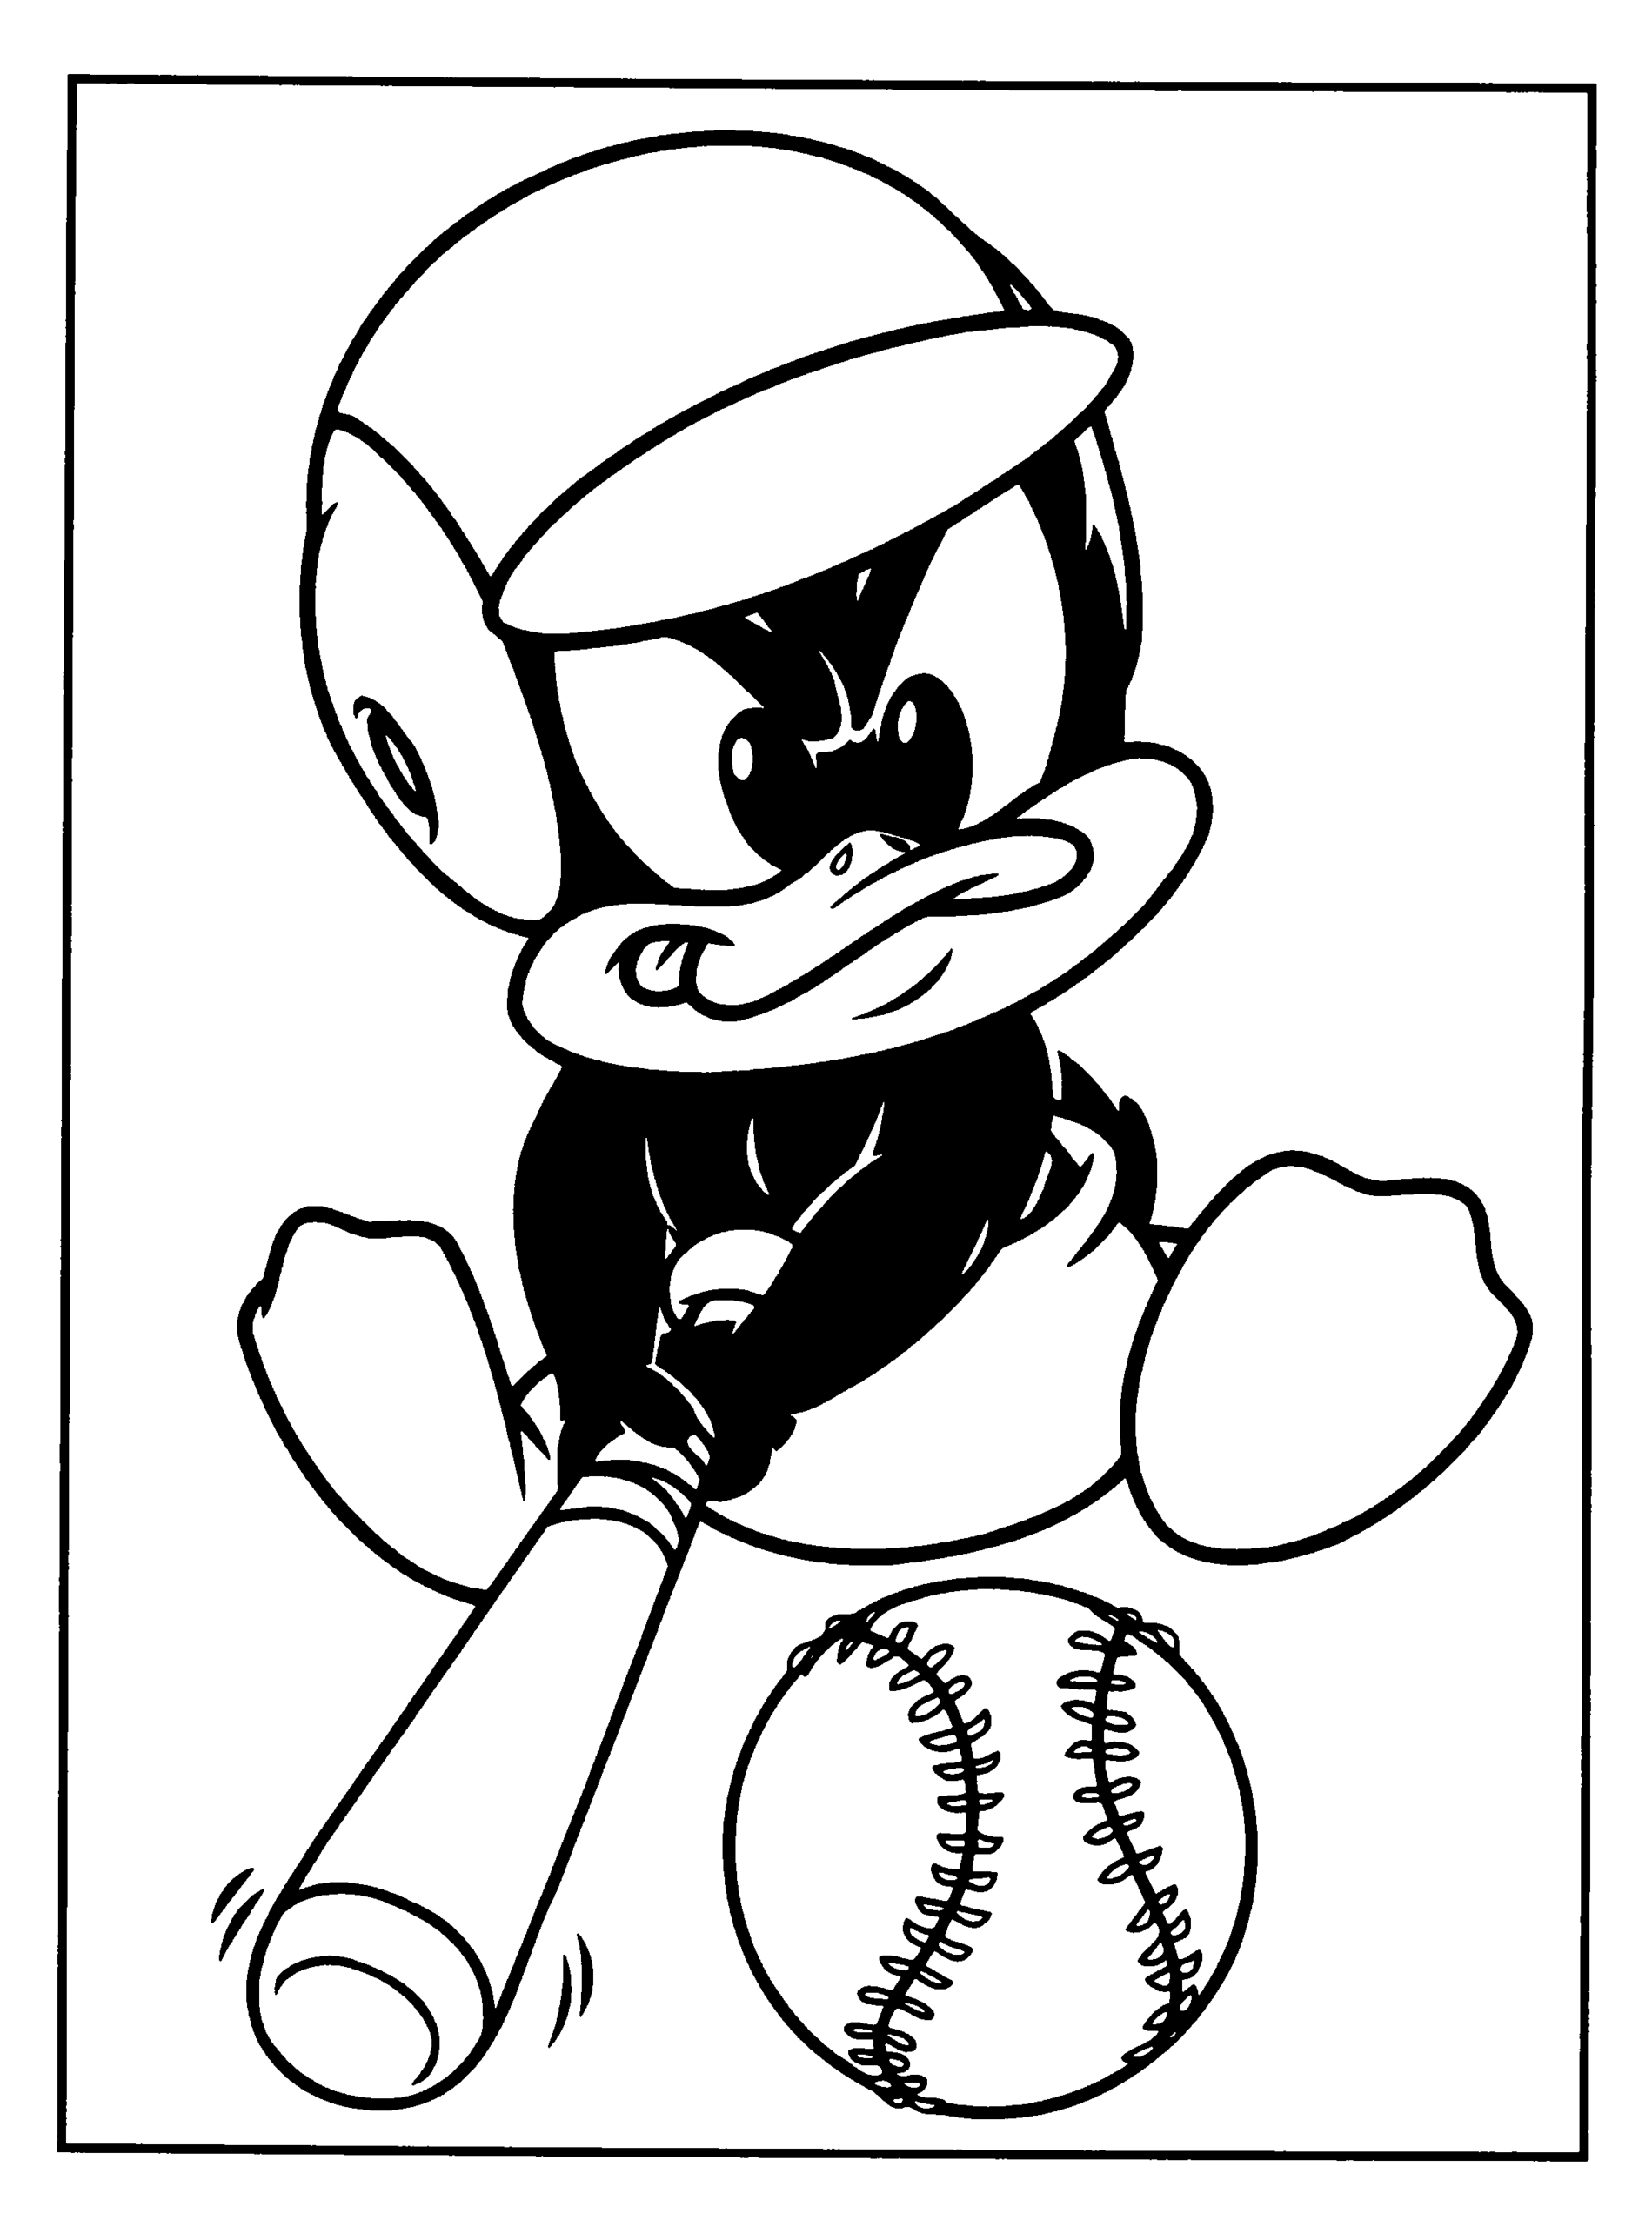 Looney Tunes Coloring Pages TV Film looney tunes 21 Printable 2020 04588 Coloring4free